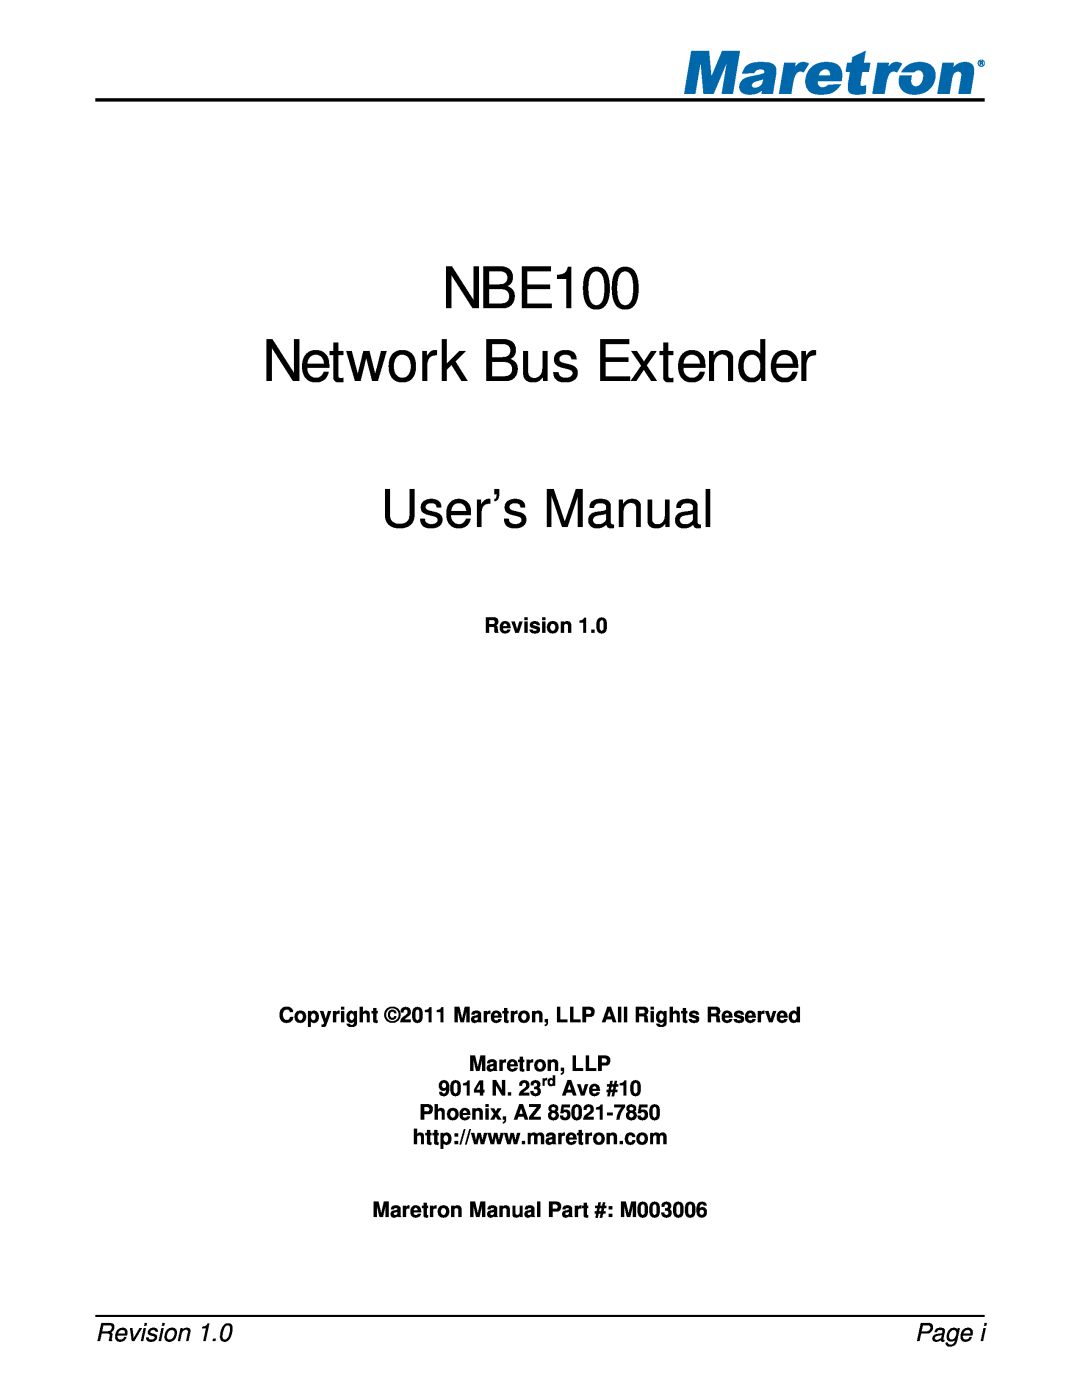 Maretron NBE100 user manual Page, Revision Copyright 2011 Maretron, LLP All Rights Reserved, Maretron Manual M003006 